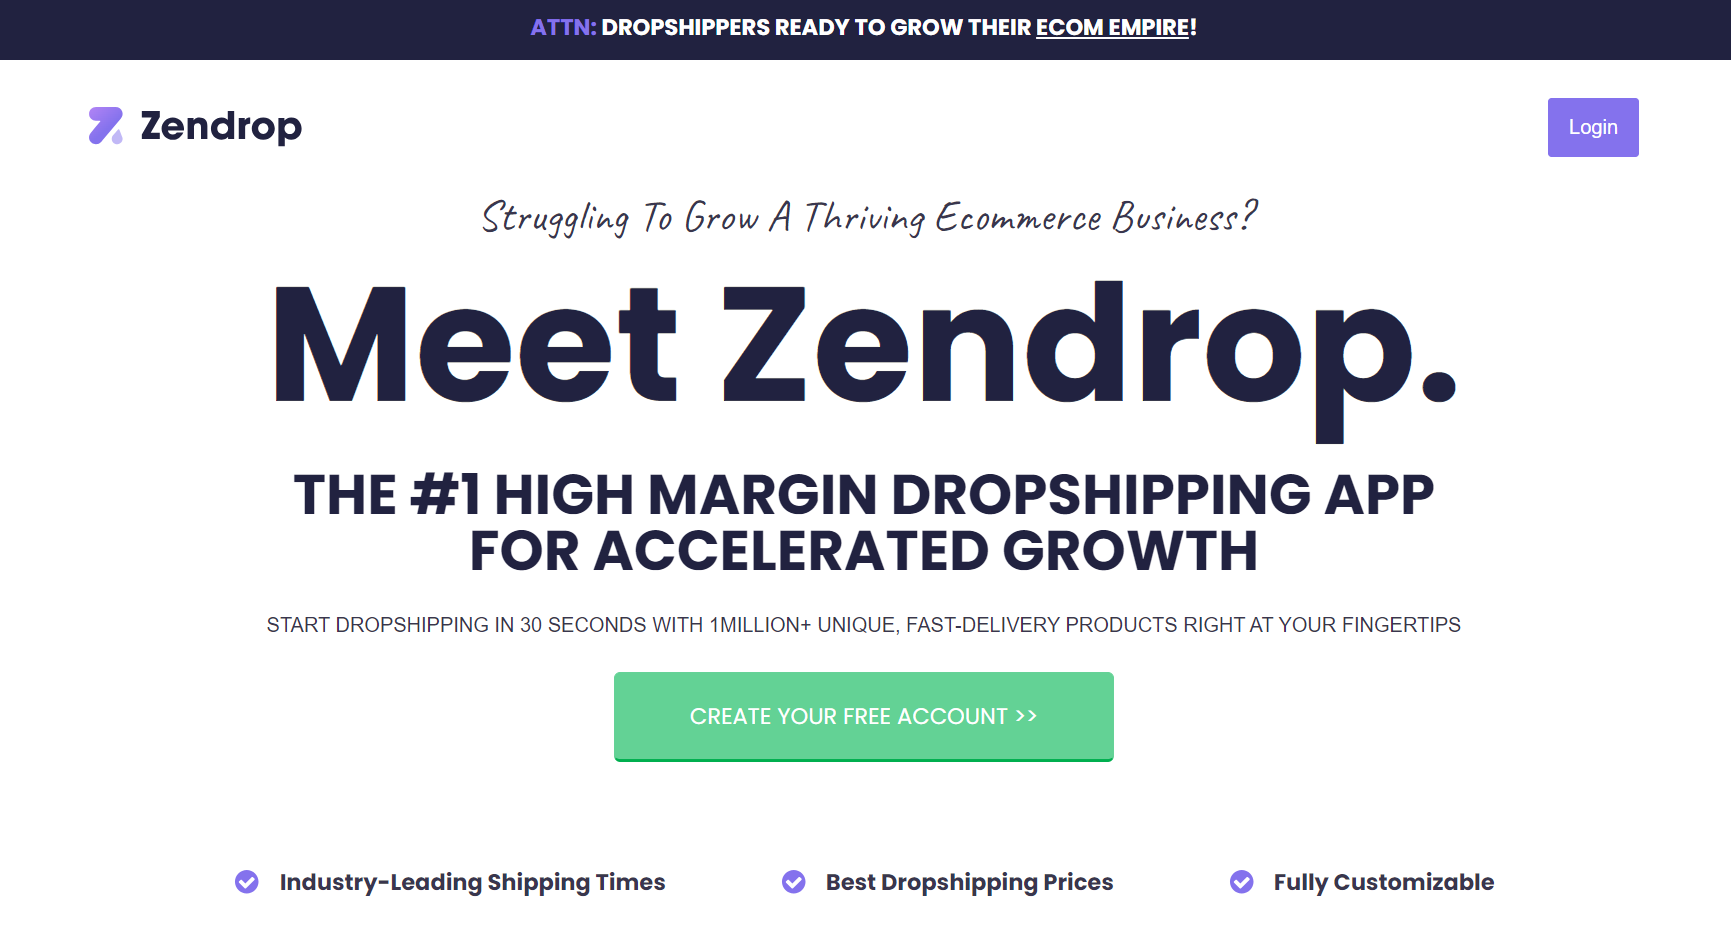 Why Choose Zendrop